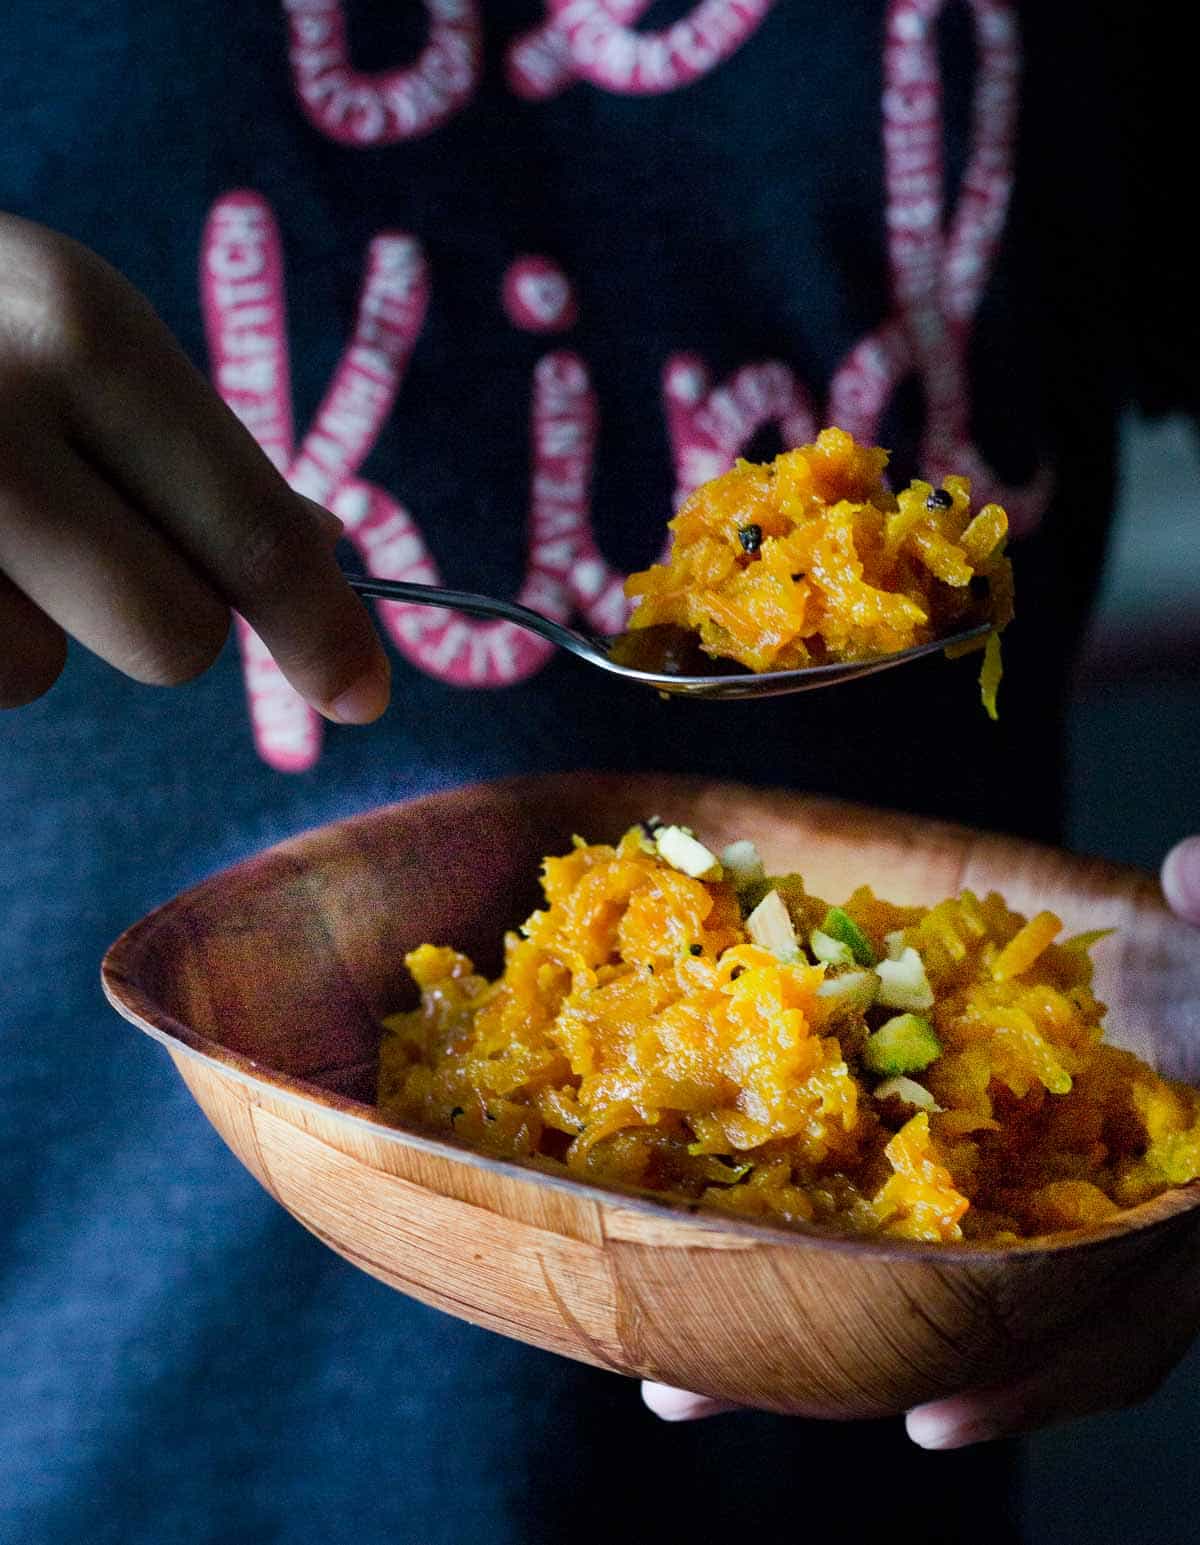 My kid savoring the carrot halwa that I made using the Instant Pot